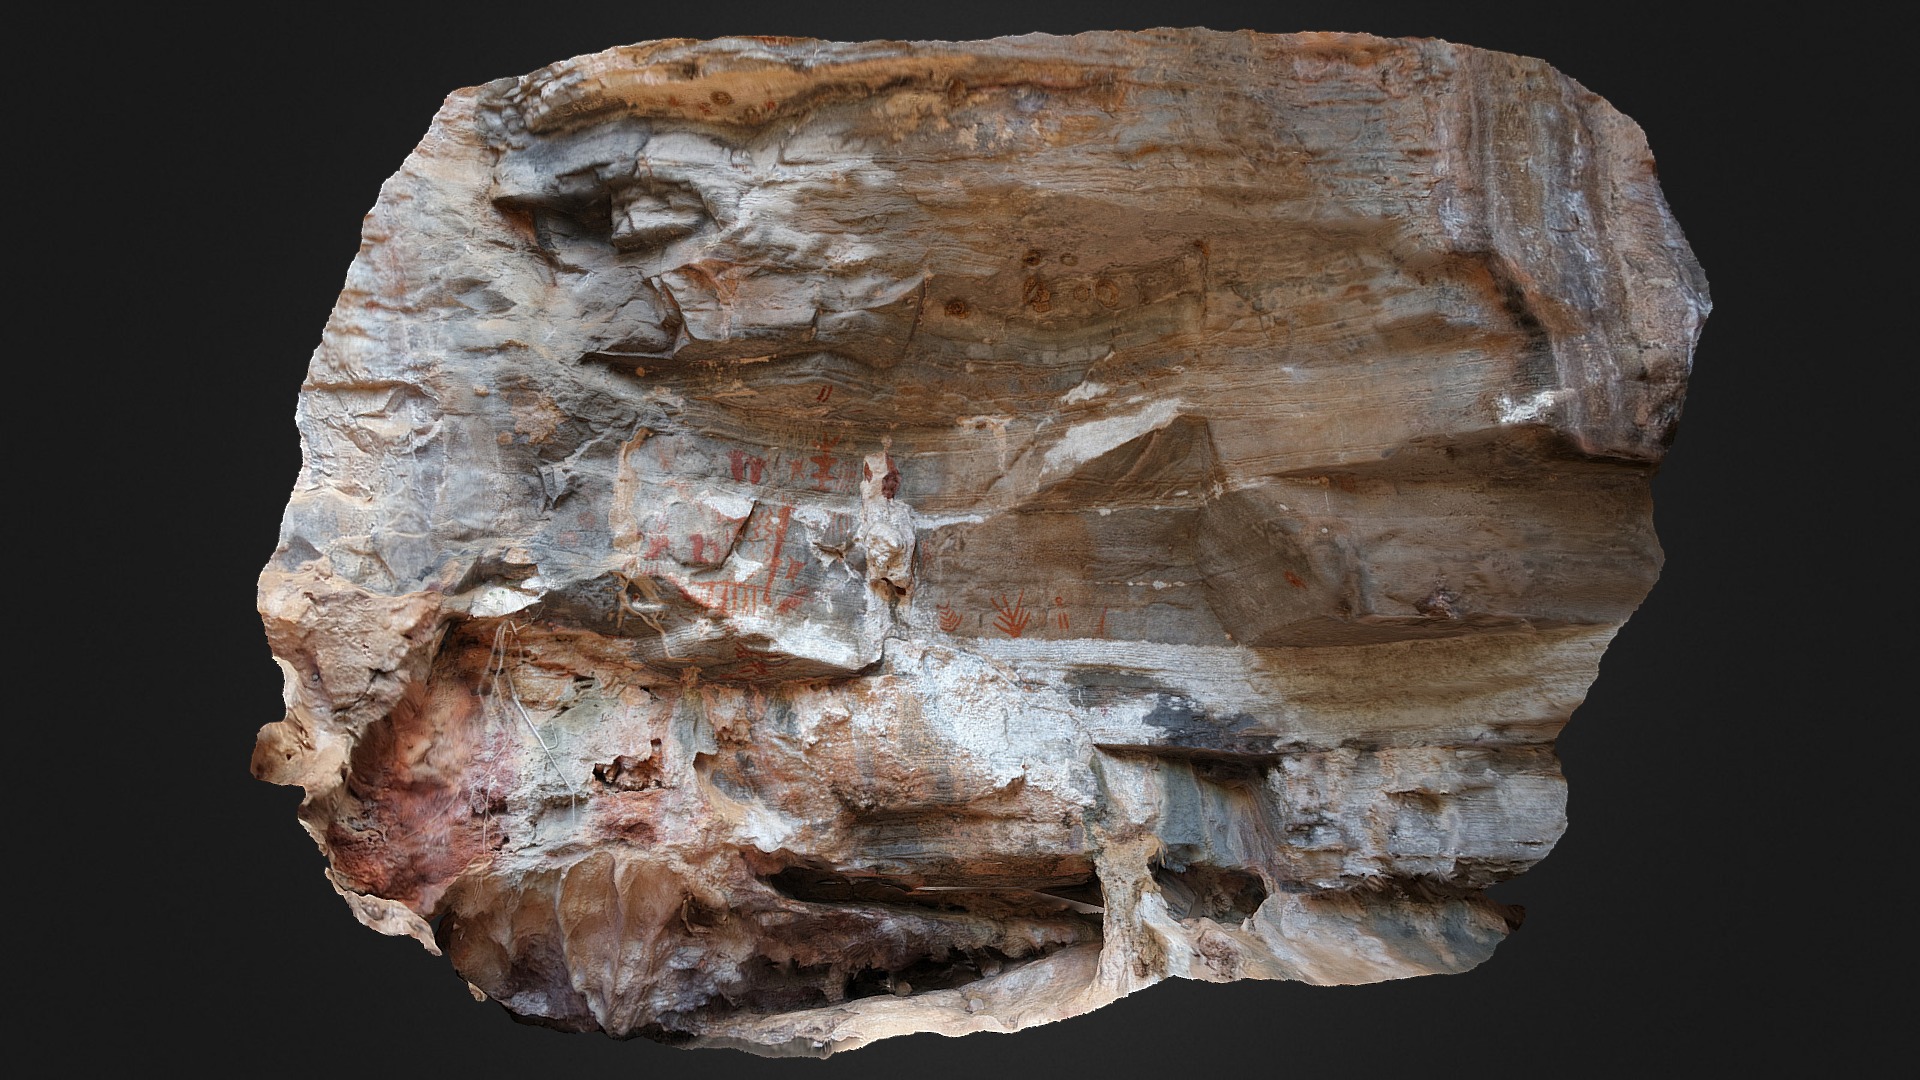 3D model Lapa Piolho de Urubu – Painel 5 - This is a 3D model of the Lapa Piolho de Urubu - Painel 5. The 3D model is about a rock with a carving in it.